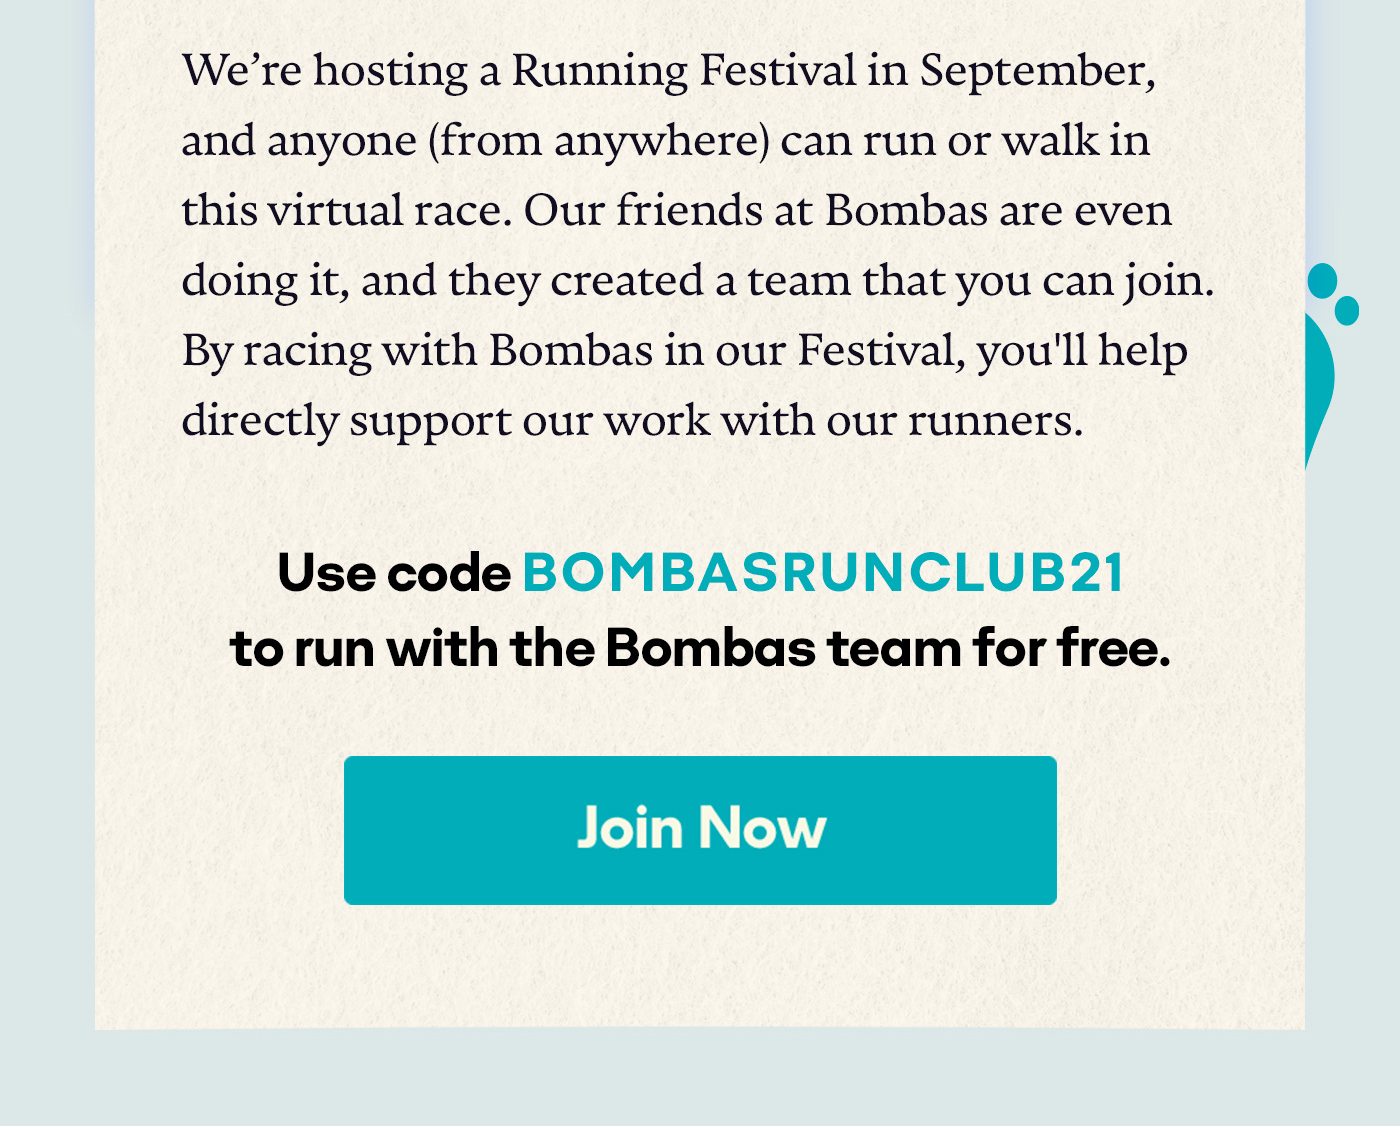  We’re hosting a Running Festival in September, and anyone (from anywhere) can run or walk in this virtual race. Our friends at Bombas are even doing it, and they created a team that you can actually join. By racing with Bombas in our Festival, you'll help directly support our work with our runners. Use BOMBASRUNCLUB21 to run with the Bombas team for free. Join Now.